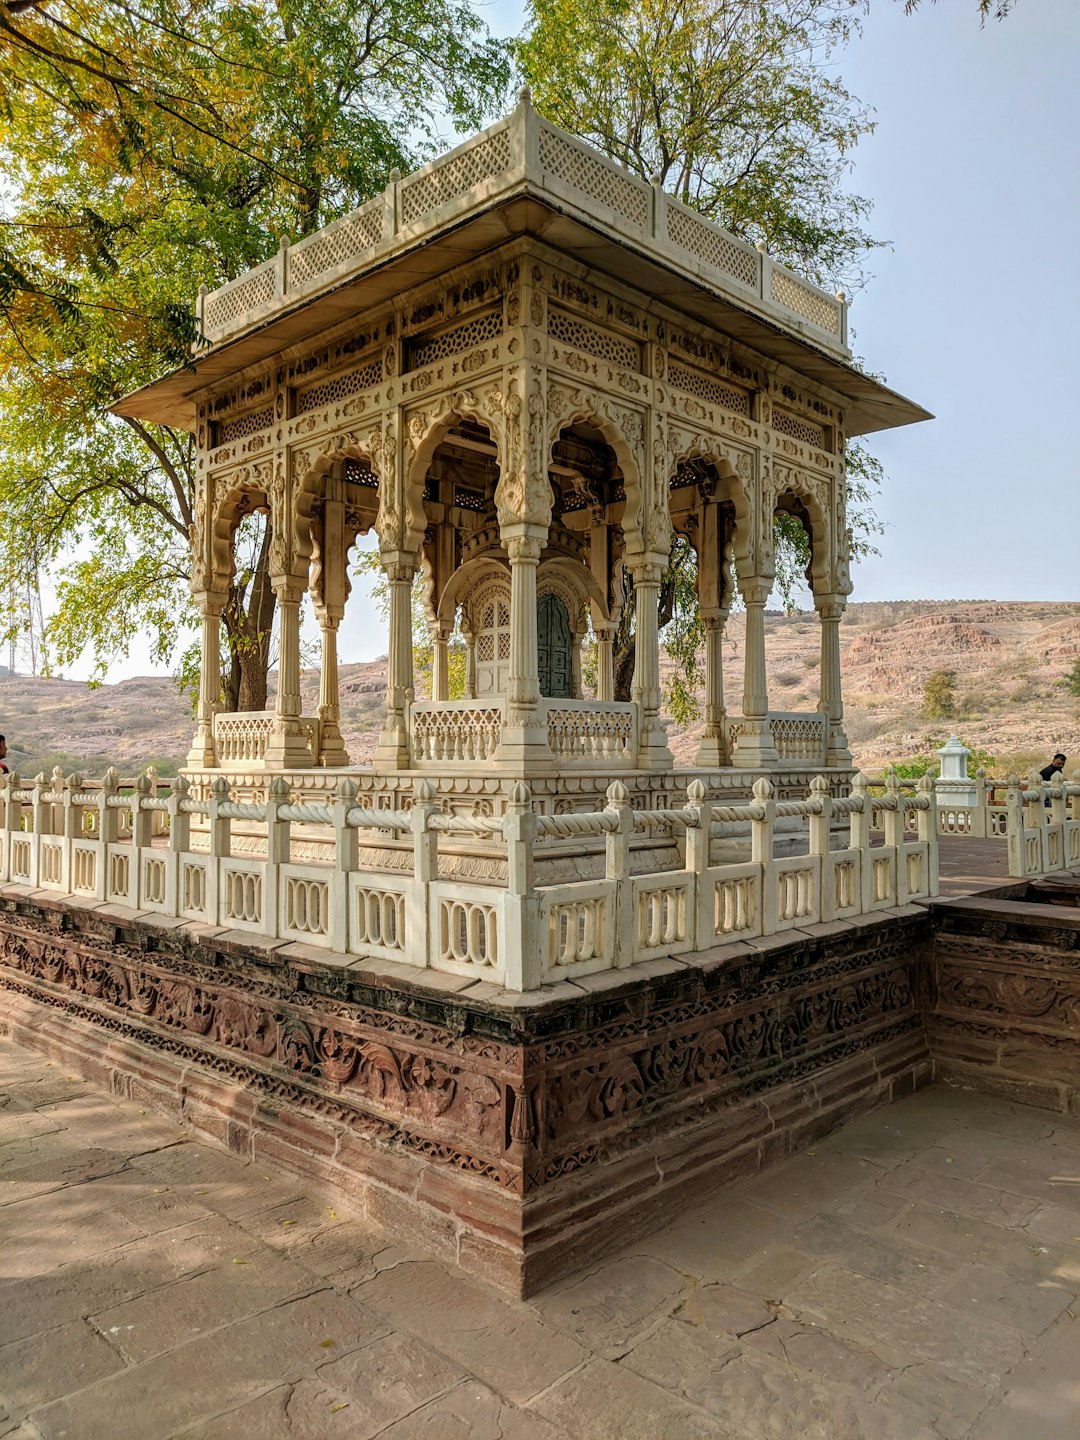 Travel Tips and Stories of Jodhpur in India